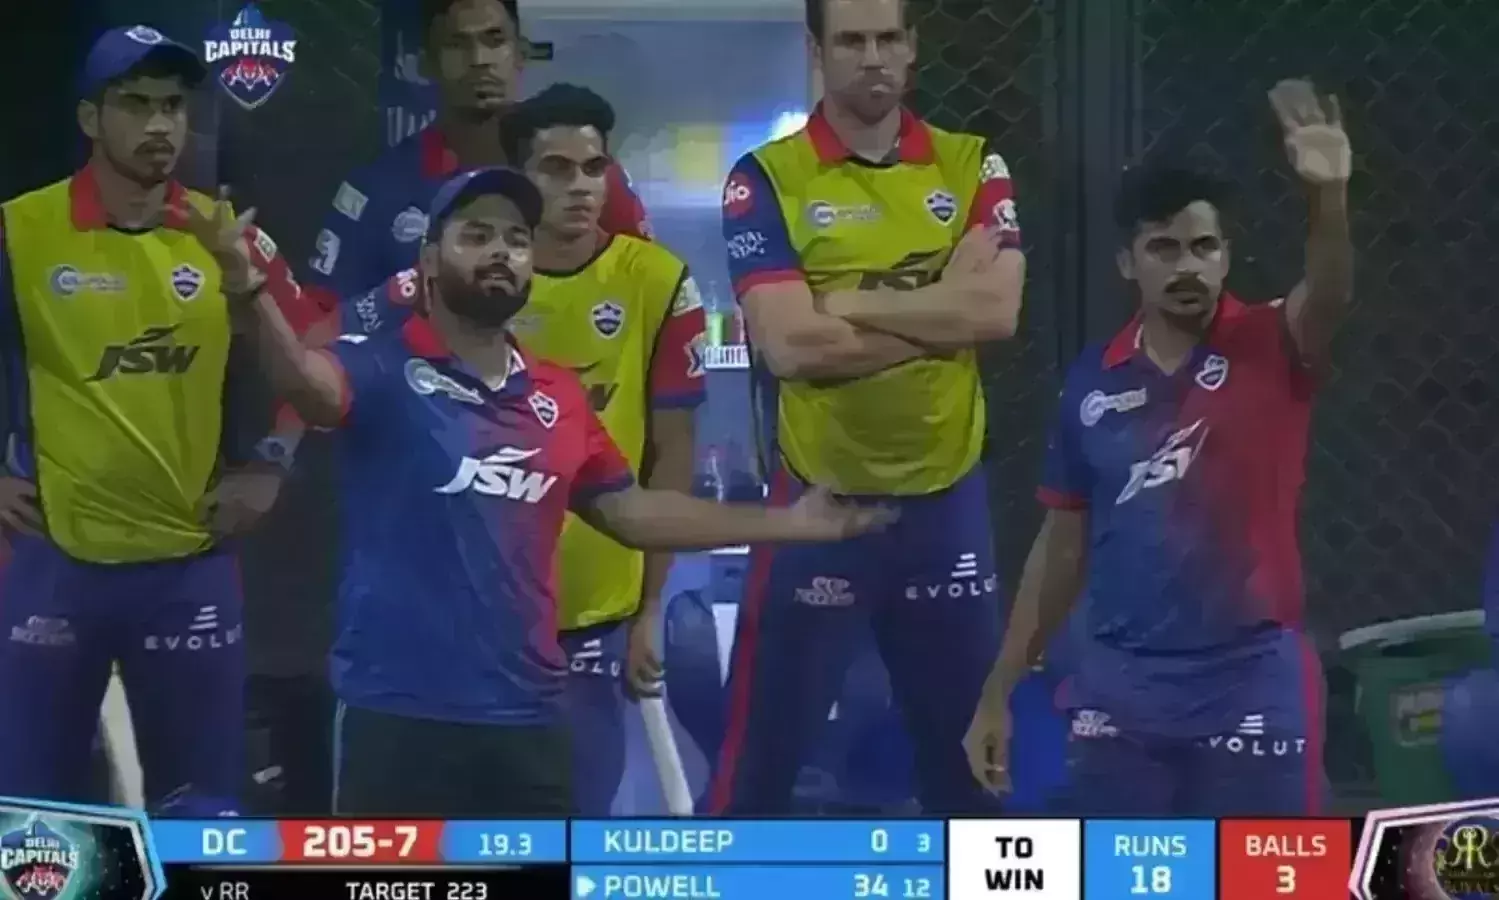 IPL 2022: 3 of Delhi Capitals crew get penalised for breach of Conduct